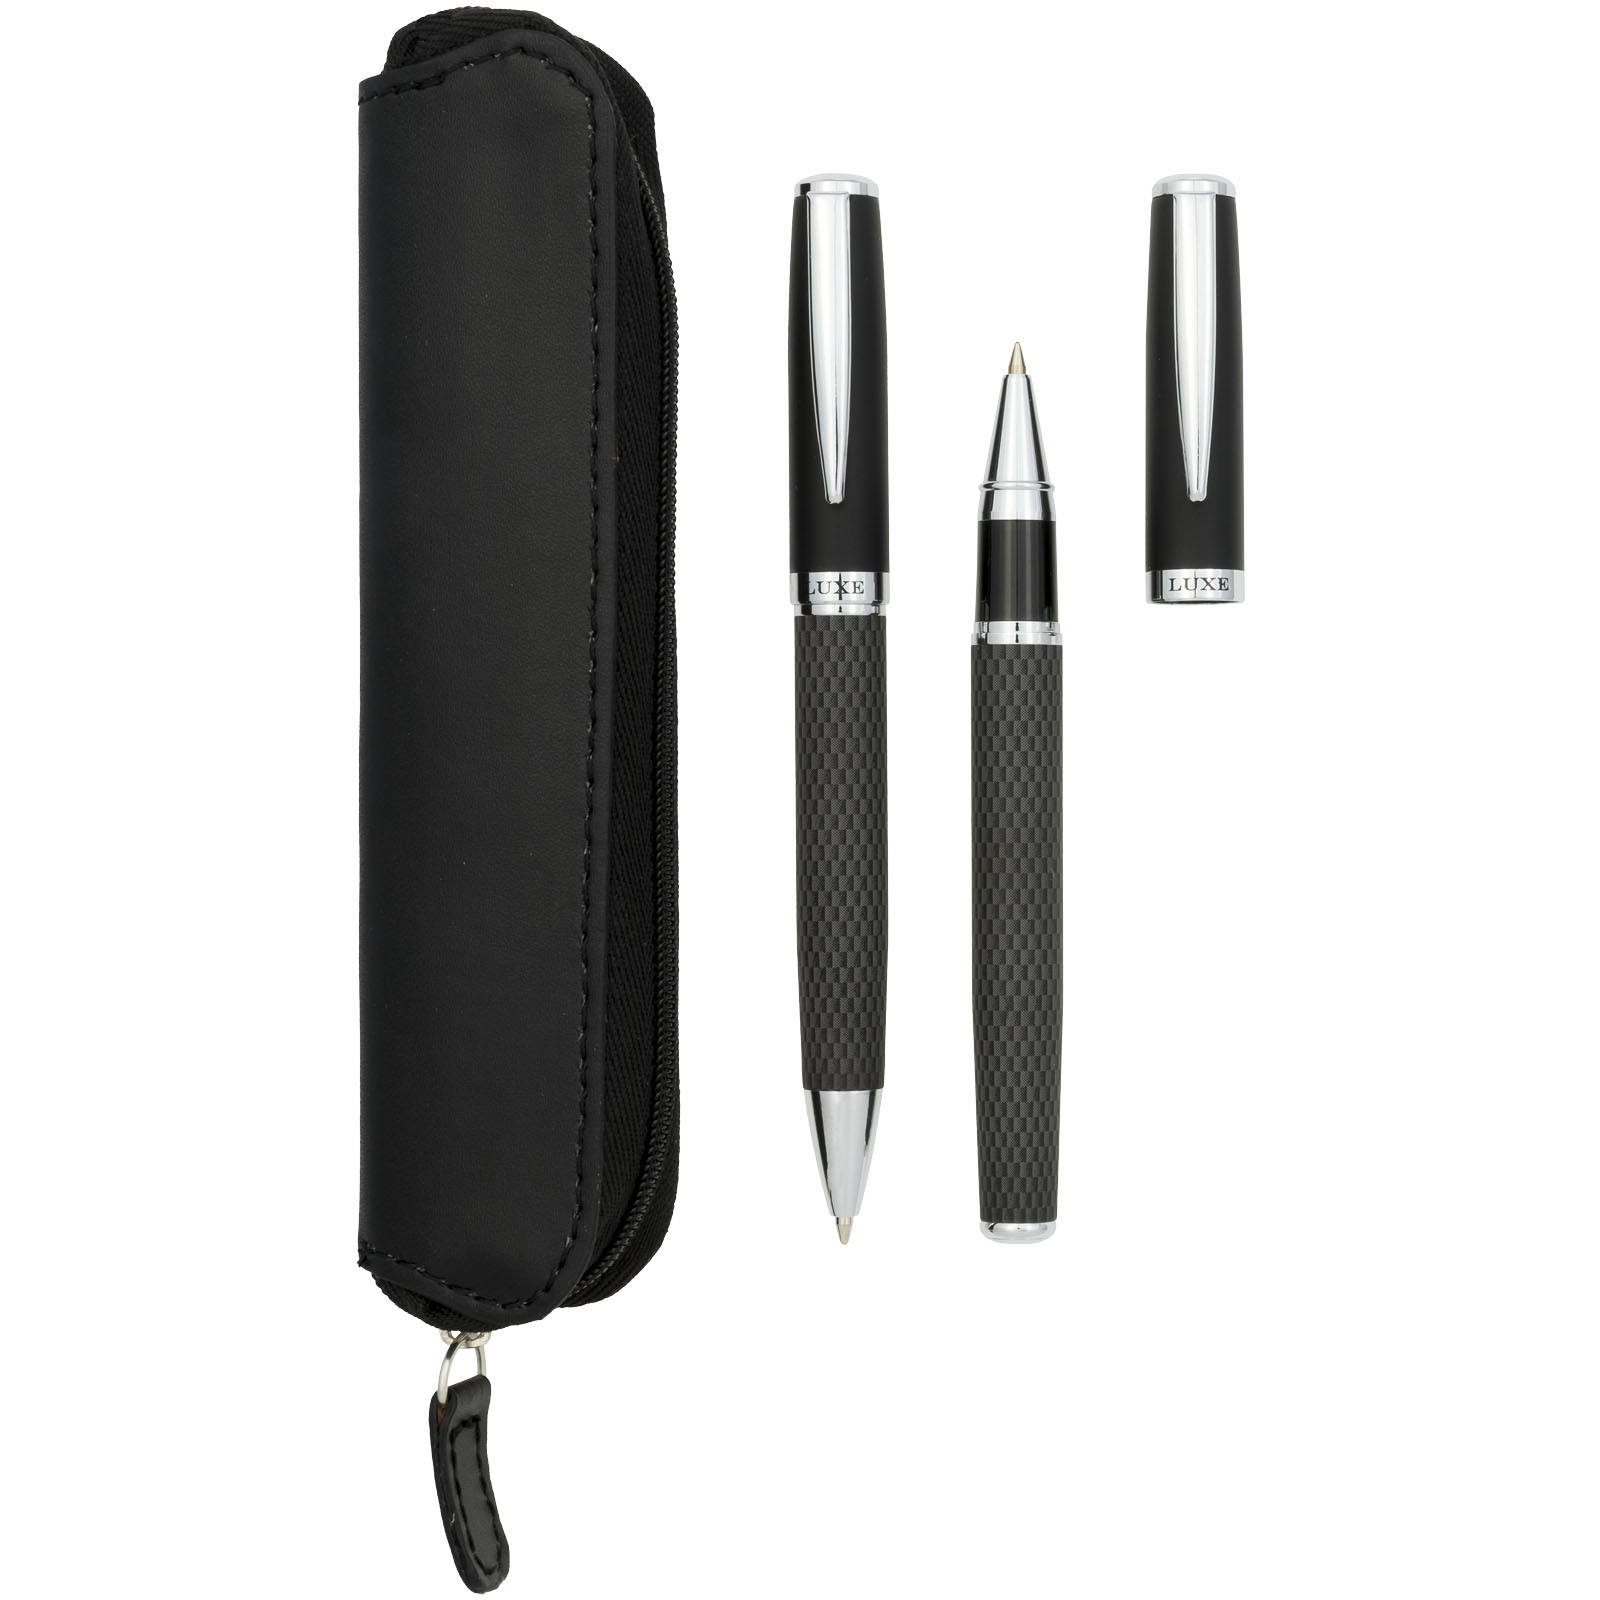 Advertising Gift sets - Carbon duo pen gift set with pouch - 4